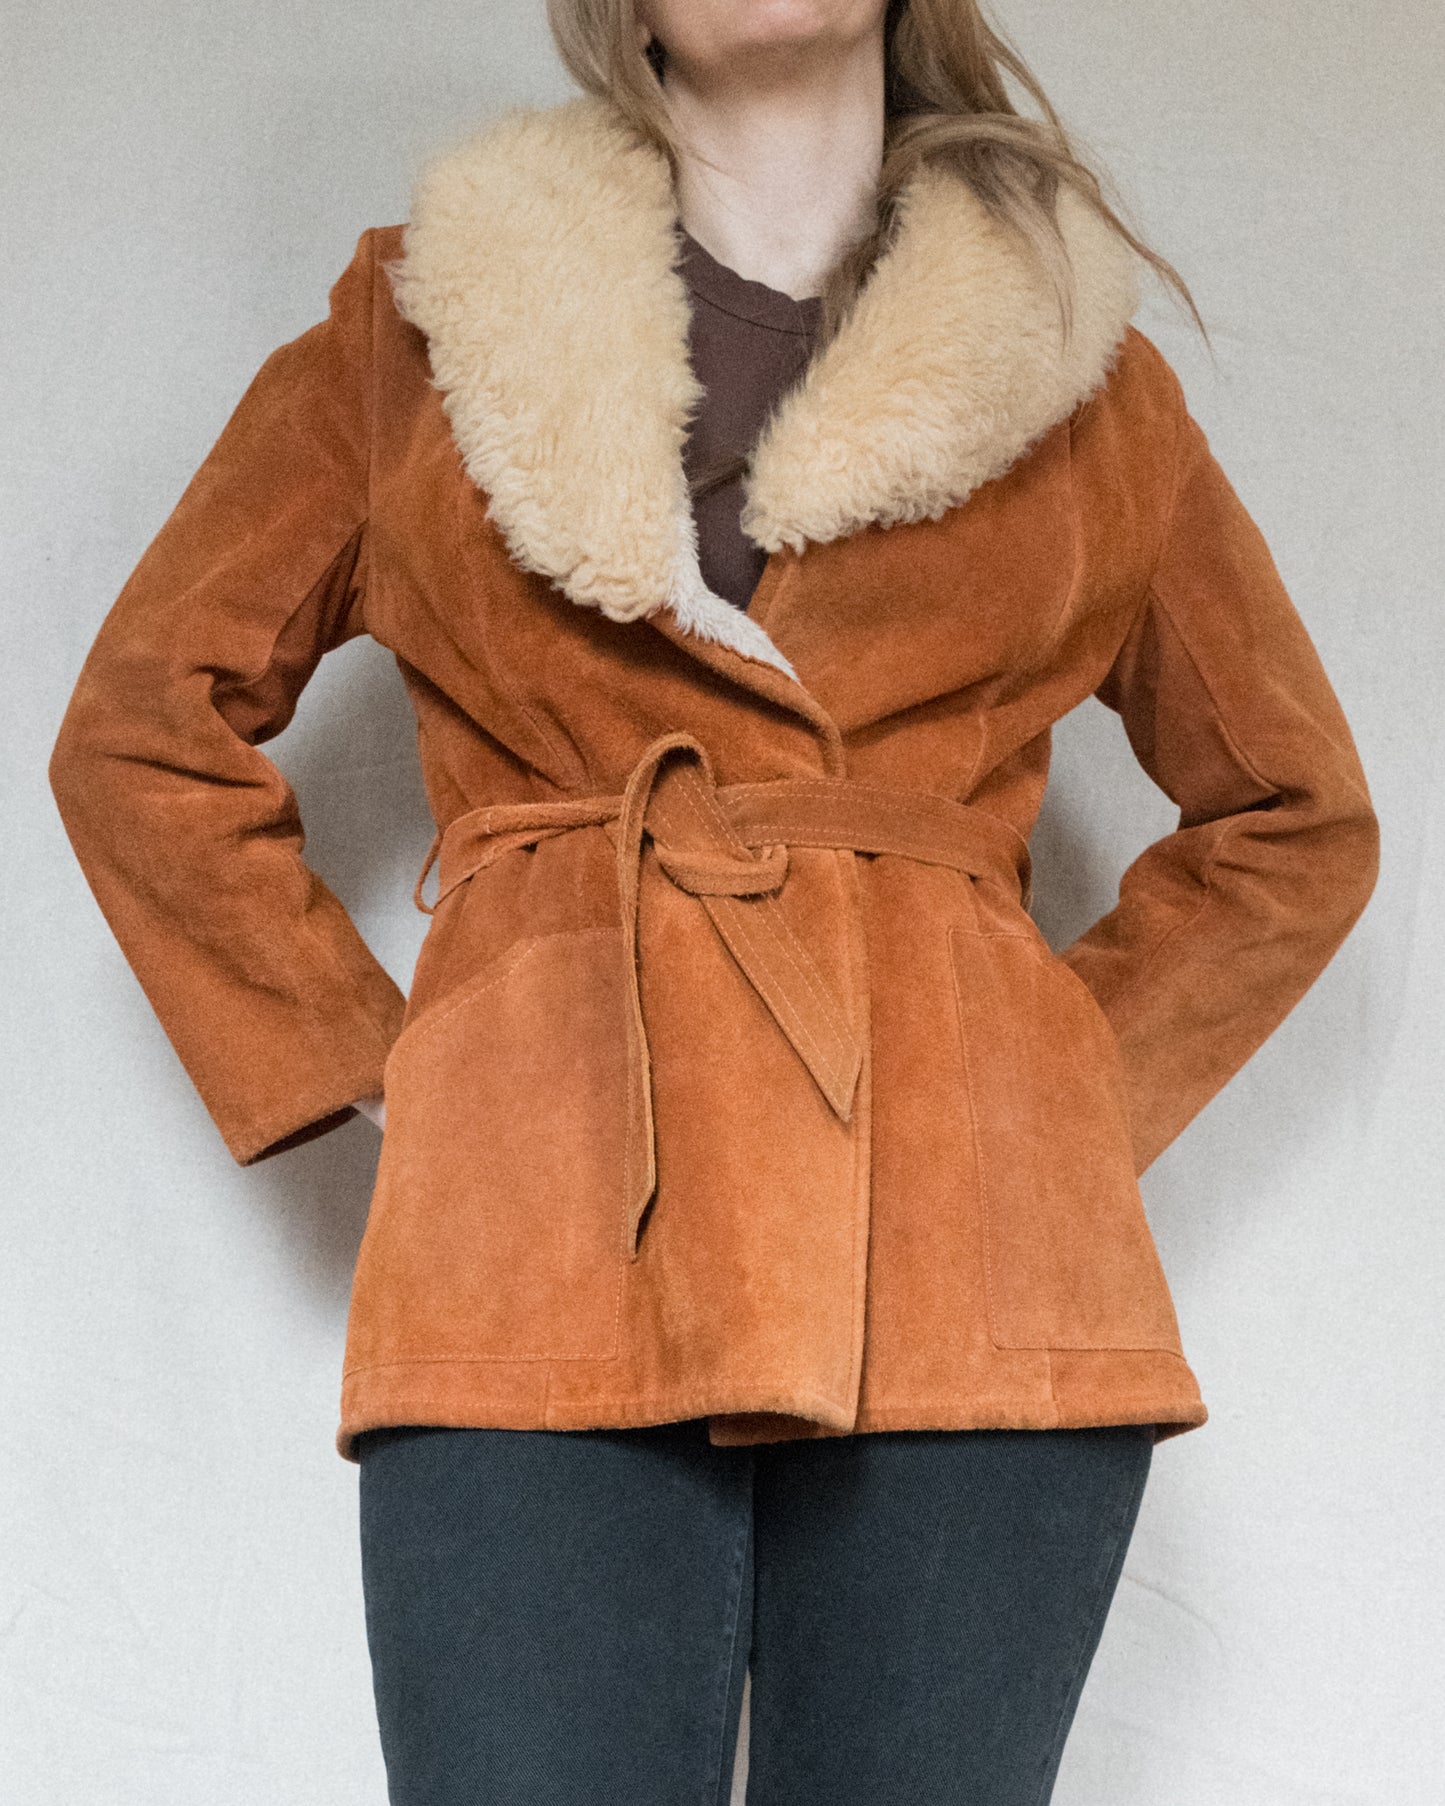 Vintage 70s Suede and Shearling Jacket (S)